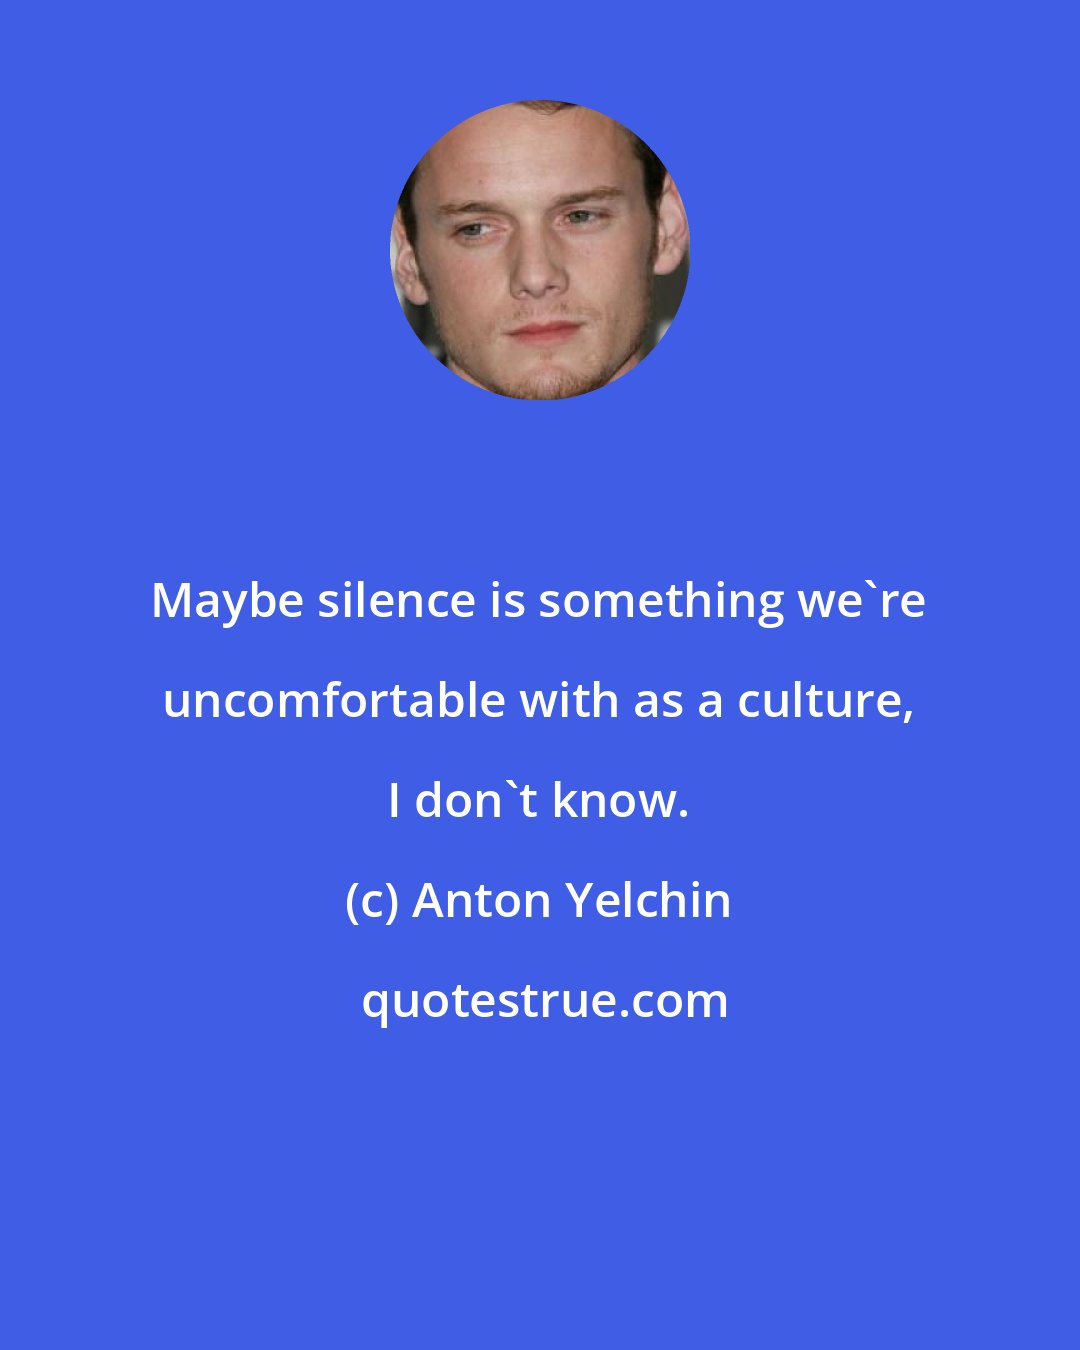 Anton Yelchin: Maybe silence is something we're uncomfortable with as a culture, I don't know.